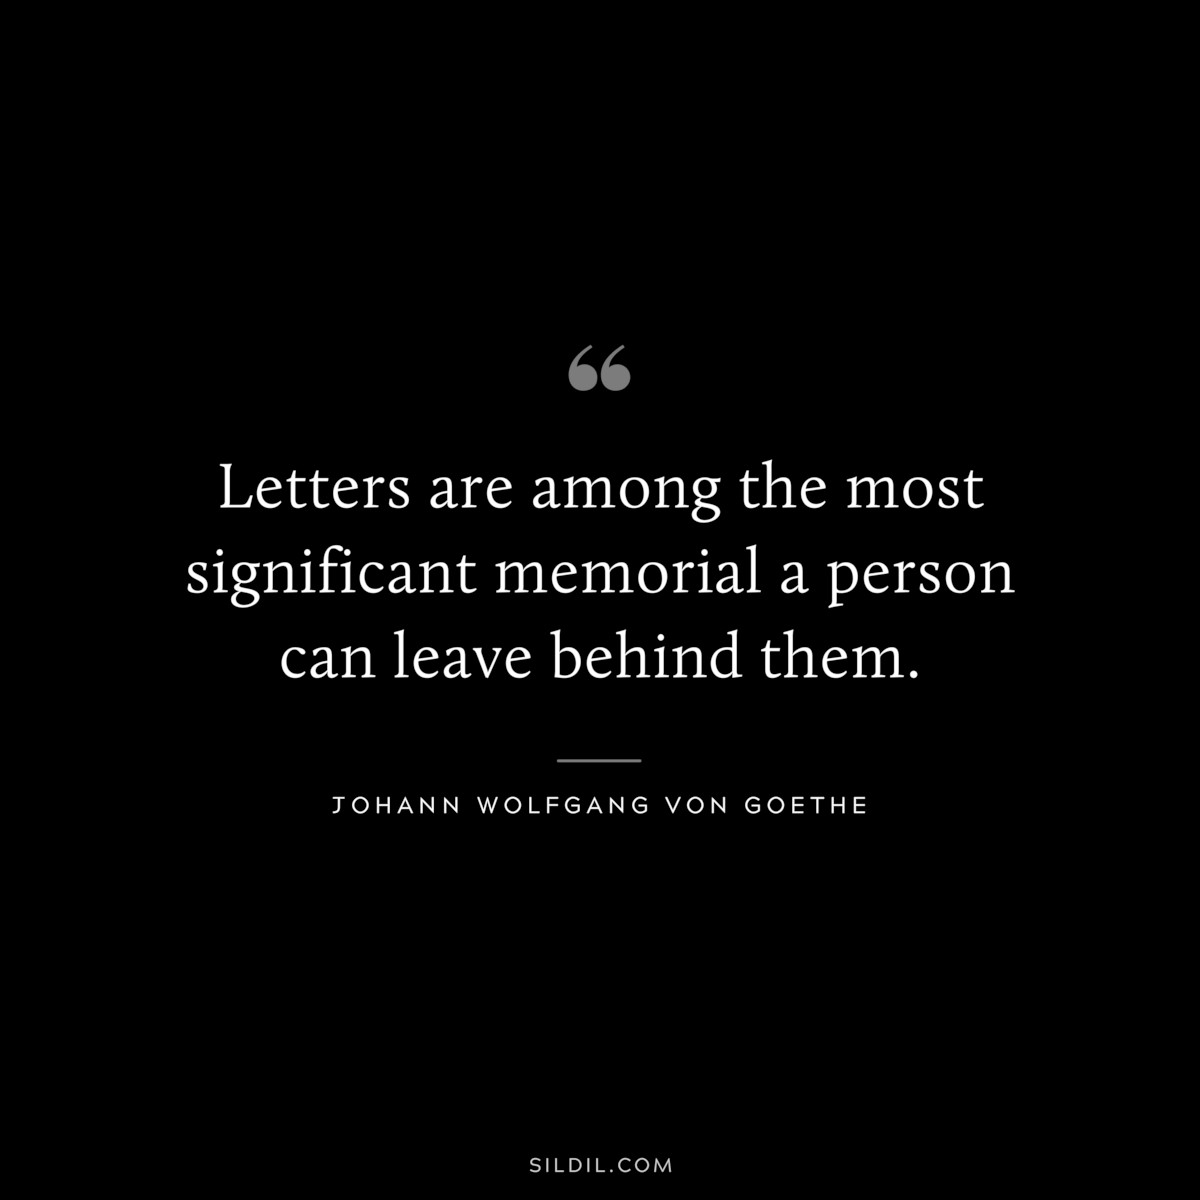 Letters are among the most significant memorial a person can leave behind them.― Johann Wolfgang von Goethe